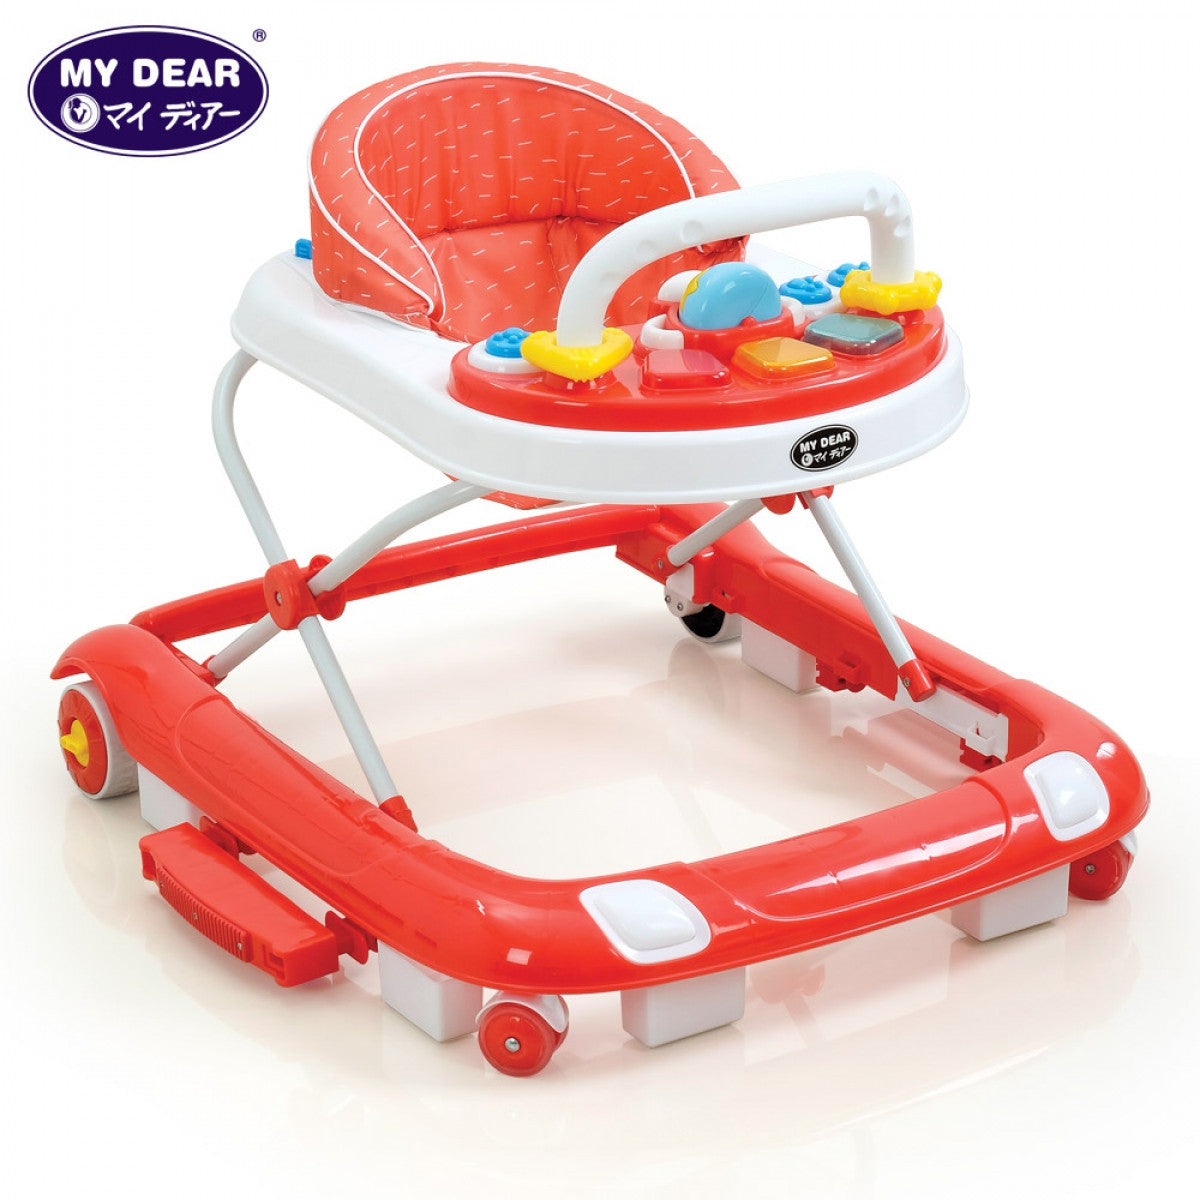 My Dear Baby Walker 20131 with Rocking Function, Detachable Music Tray and Adjustable Height Levels